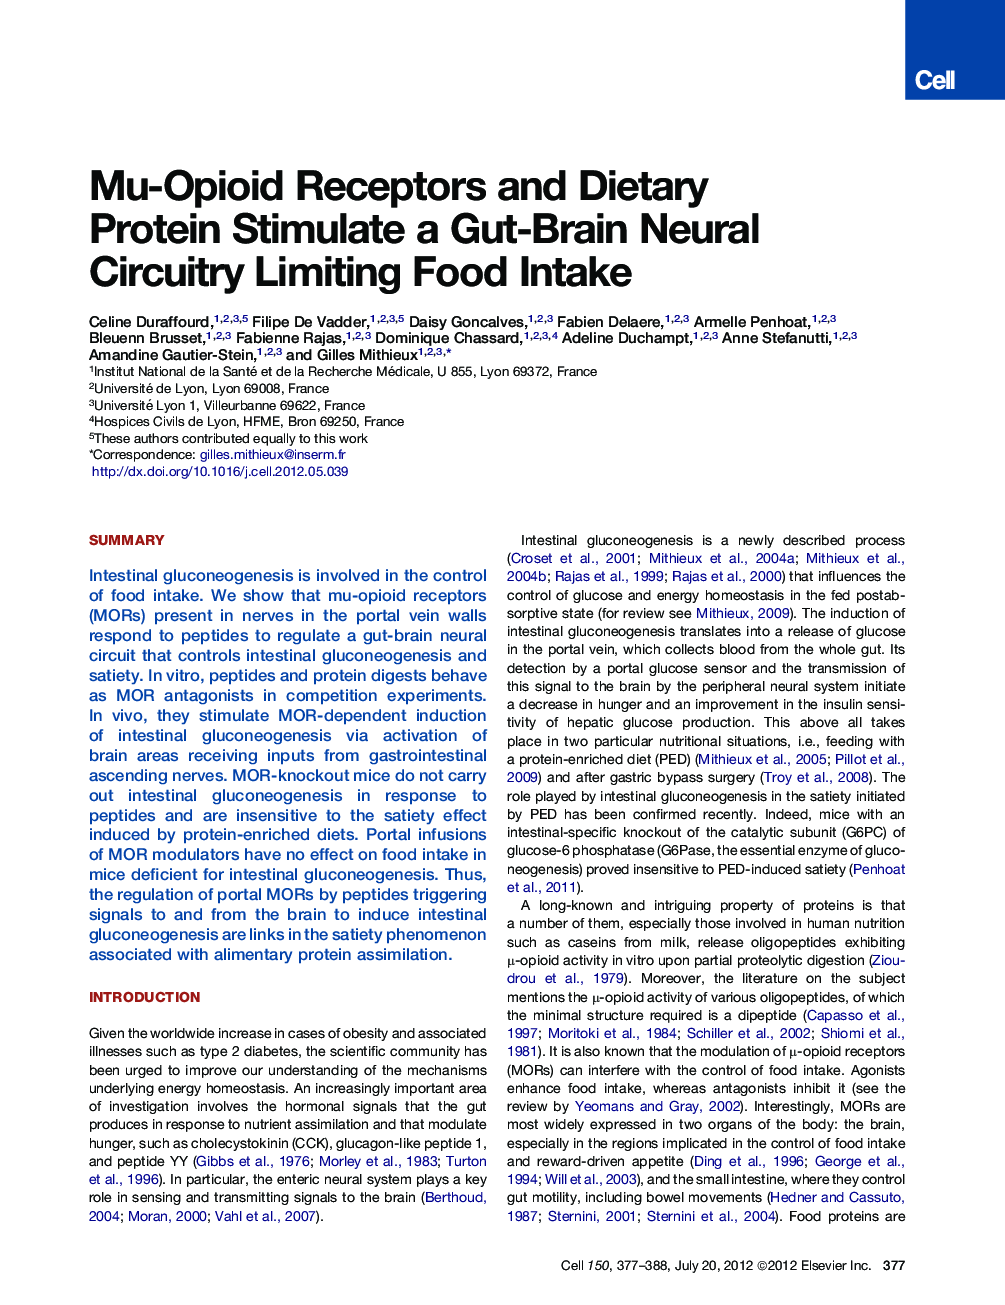 Mu-Opioid Receptors and Dietary Protein Stimulate a Gut-Brain Neural Circuitry Limiting Food Intake